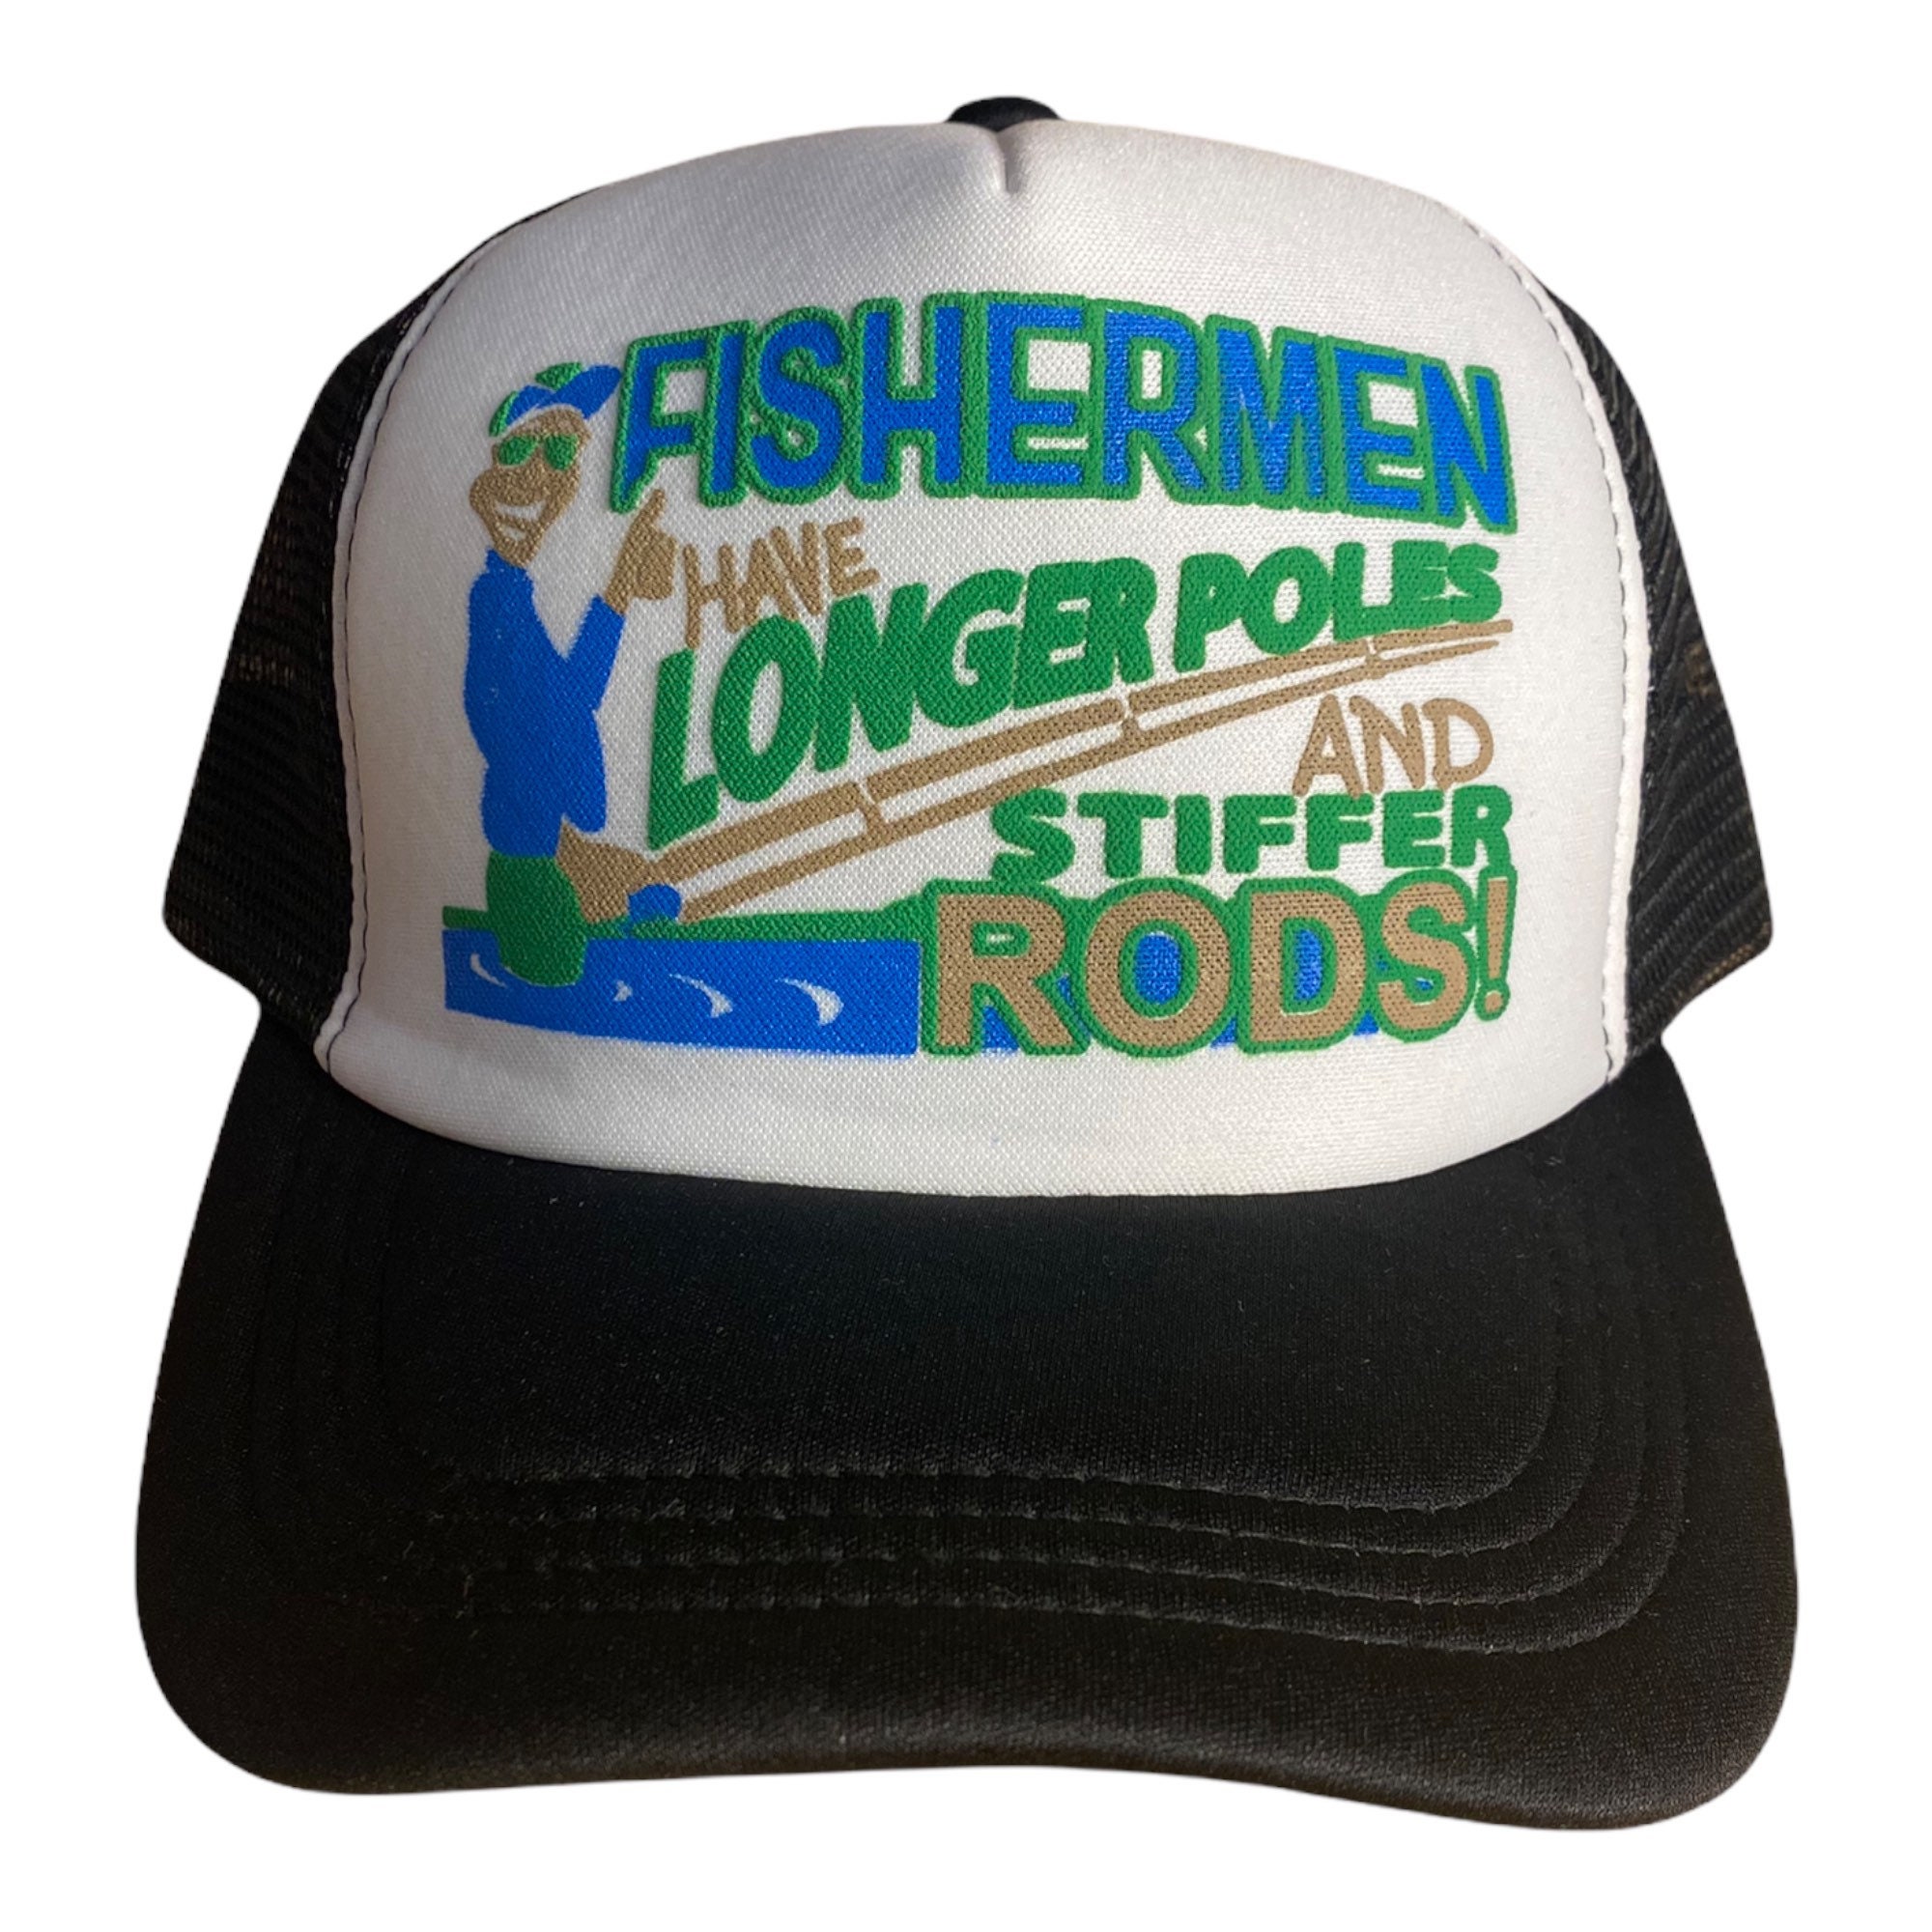 Vintage Fishing Hat // Fisherman Have Longer Poles and Stiffer Rods //  Funny Fishing Hat // Trucker Hat // Two Tone Snapback Fish Boating 